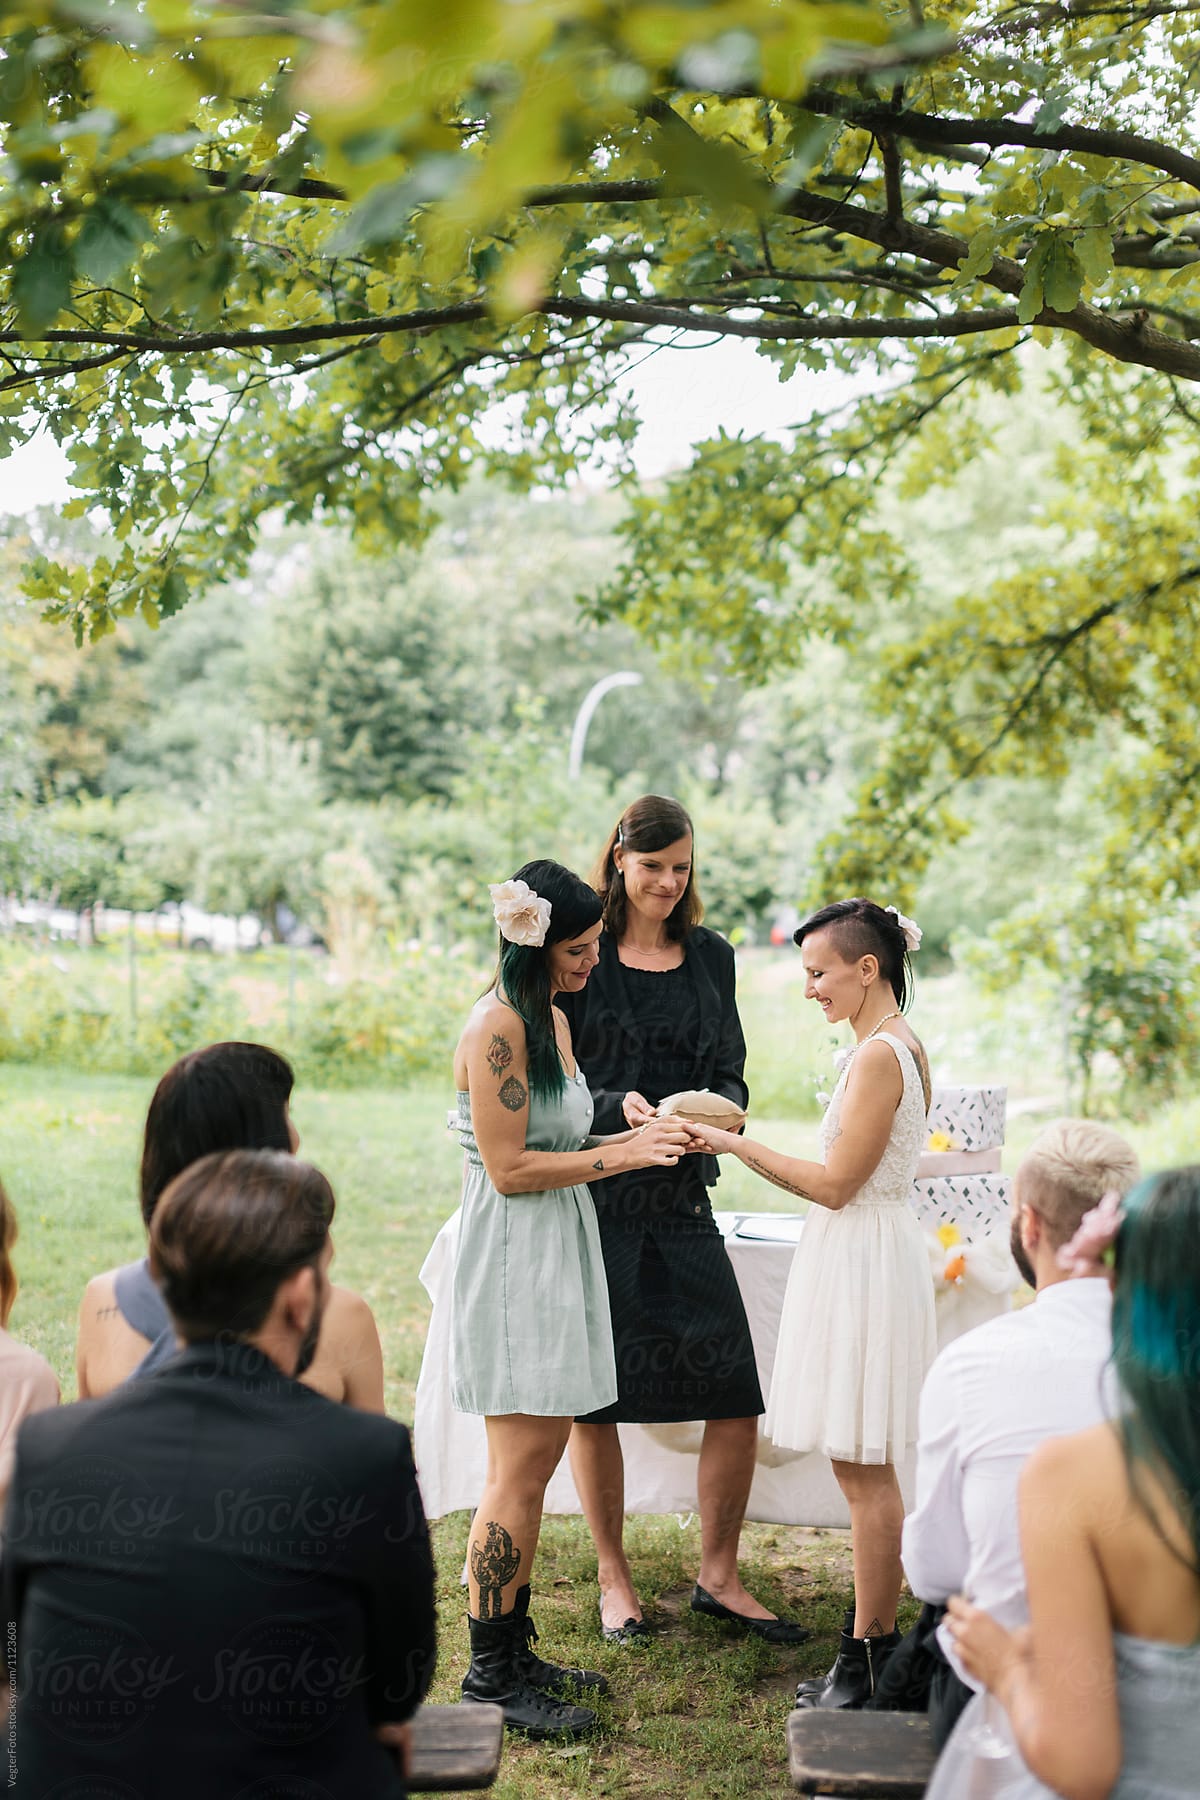 Lesbian couple exchanging rings